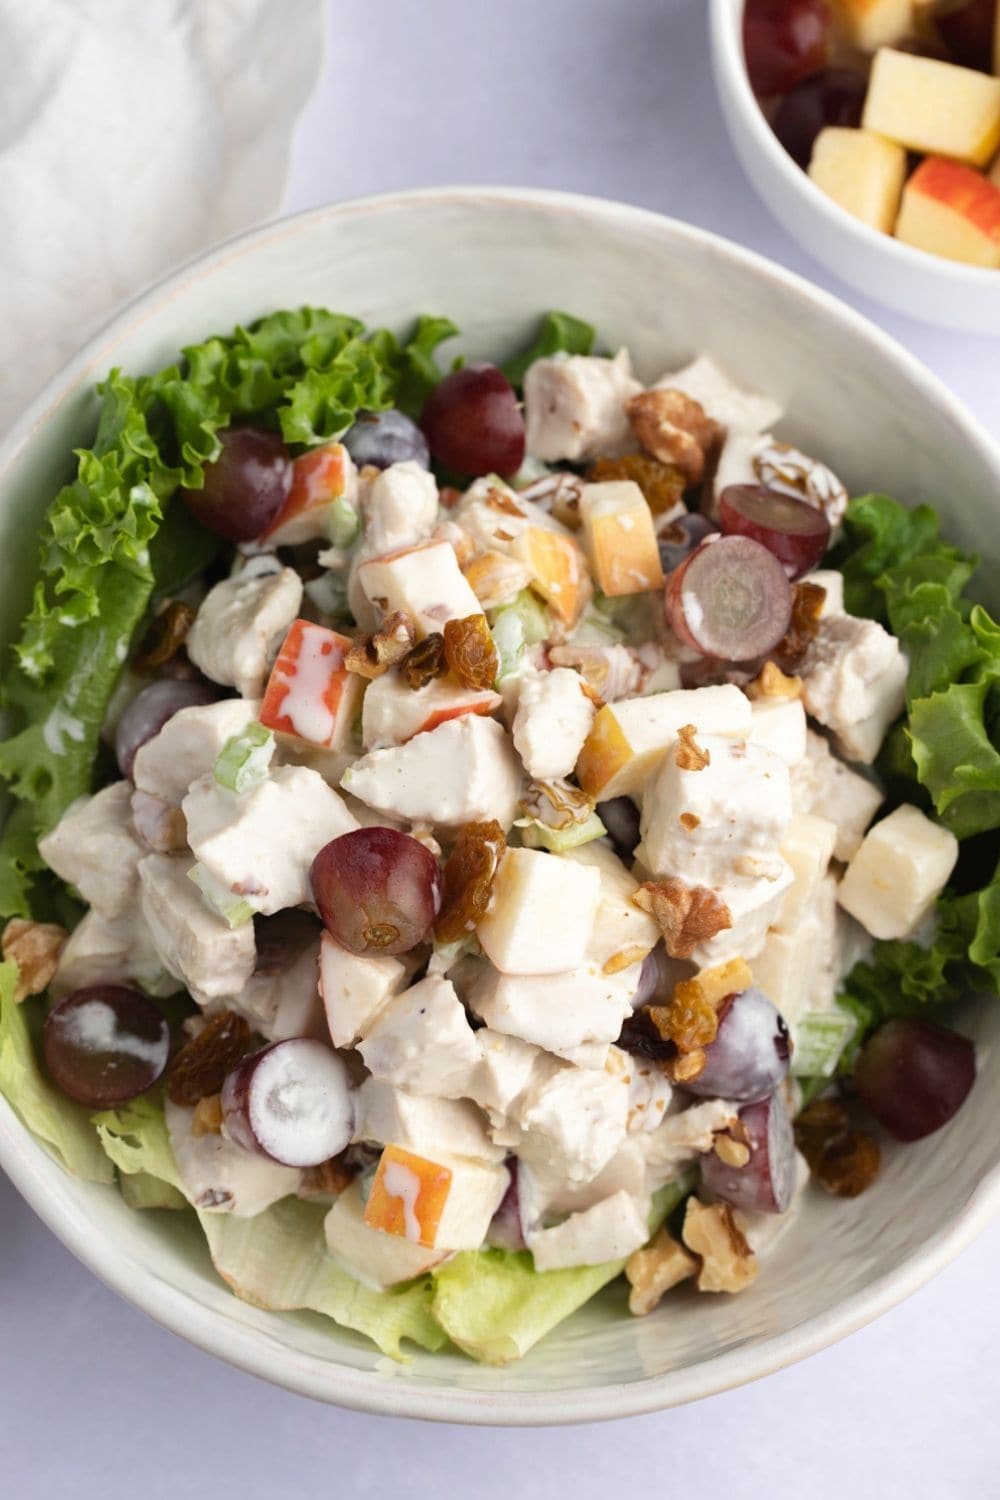 Tasty Chicken Waldorf Salad with Chicken, Fruits and Vegetables